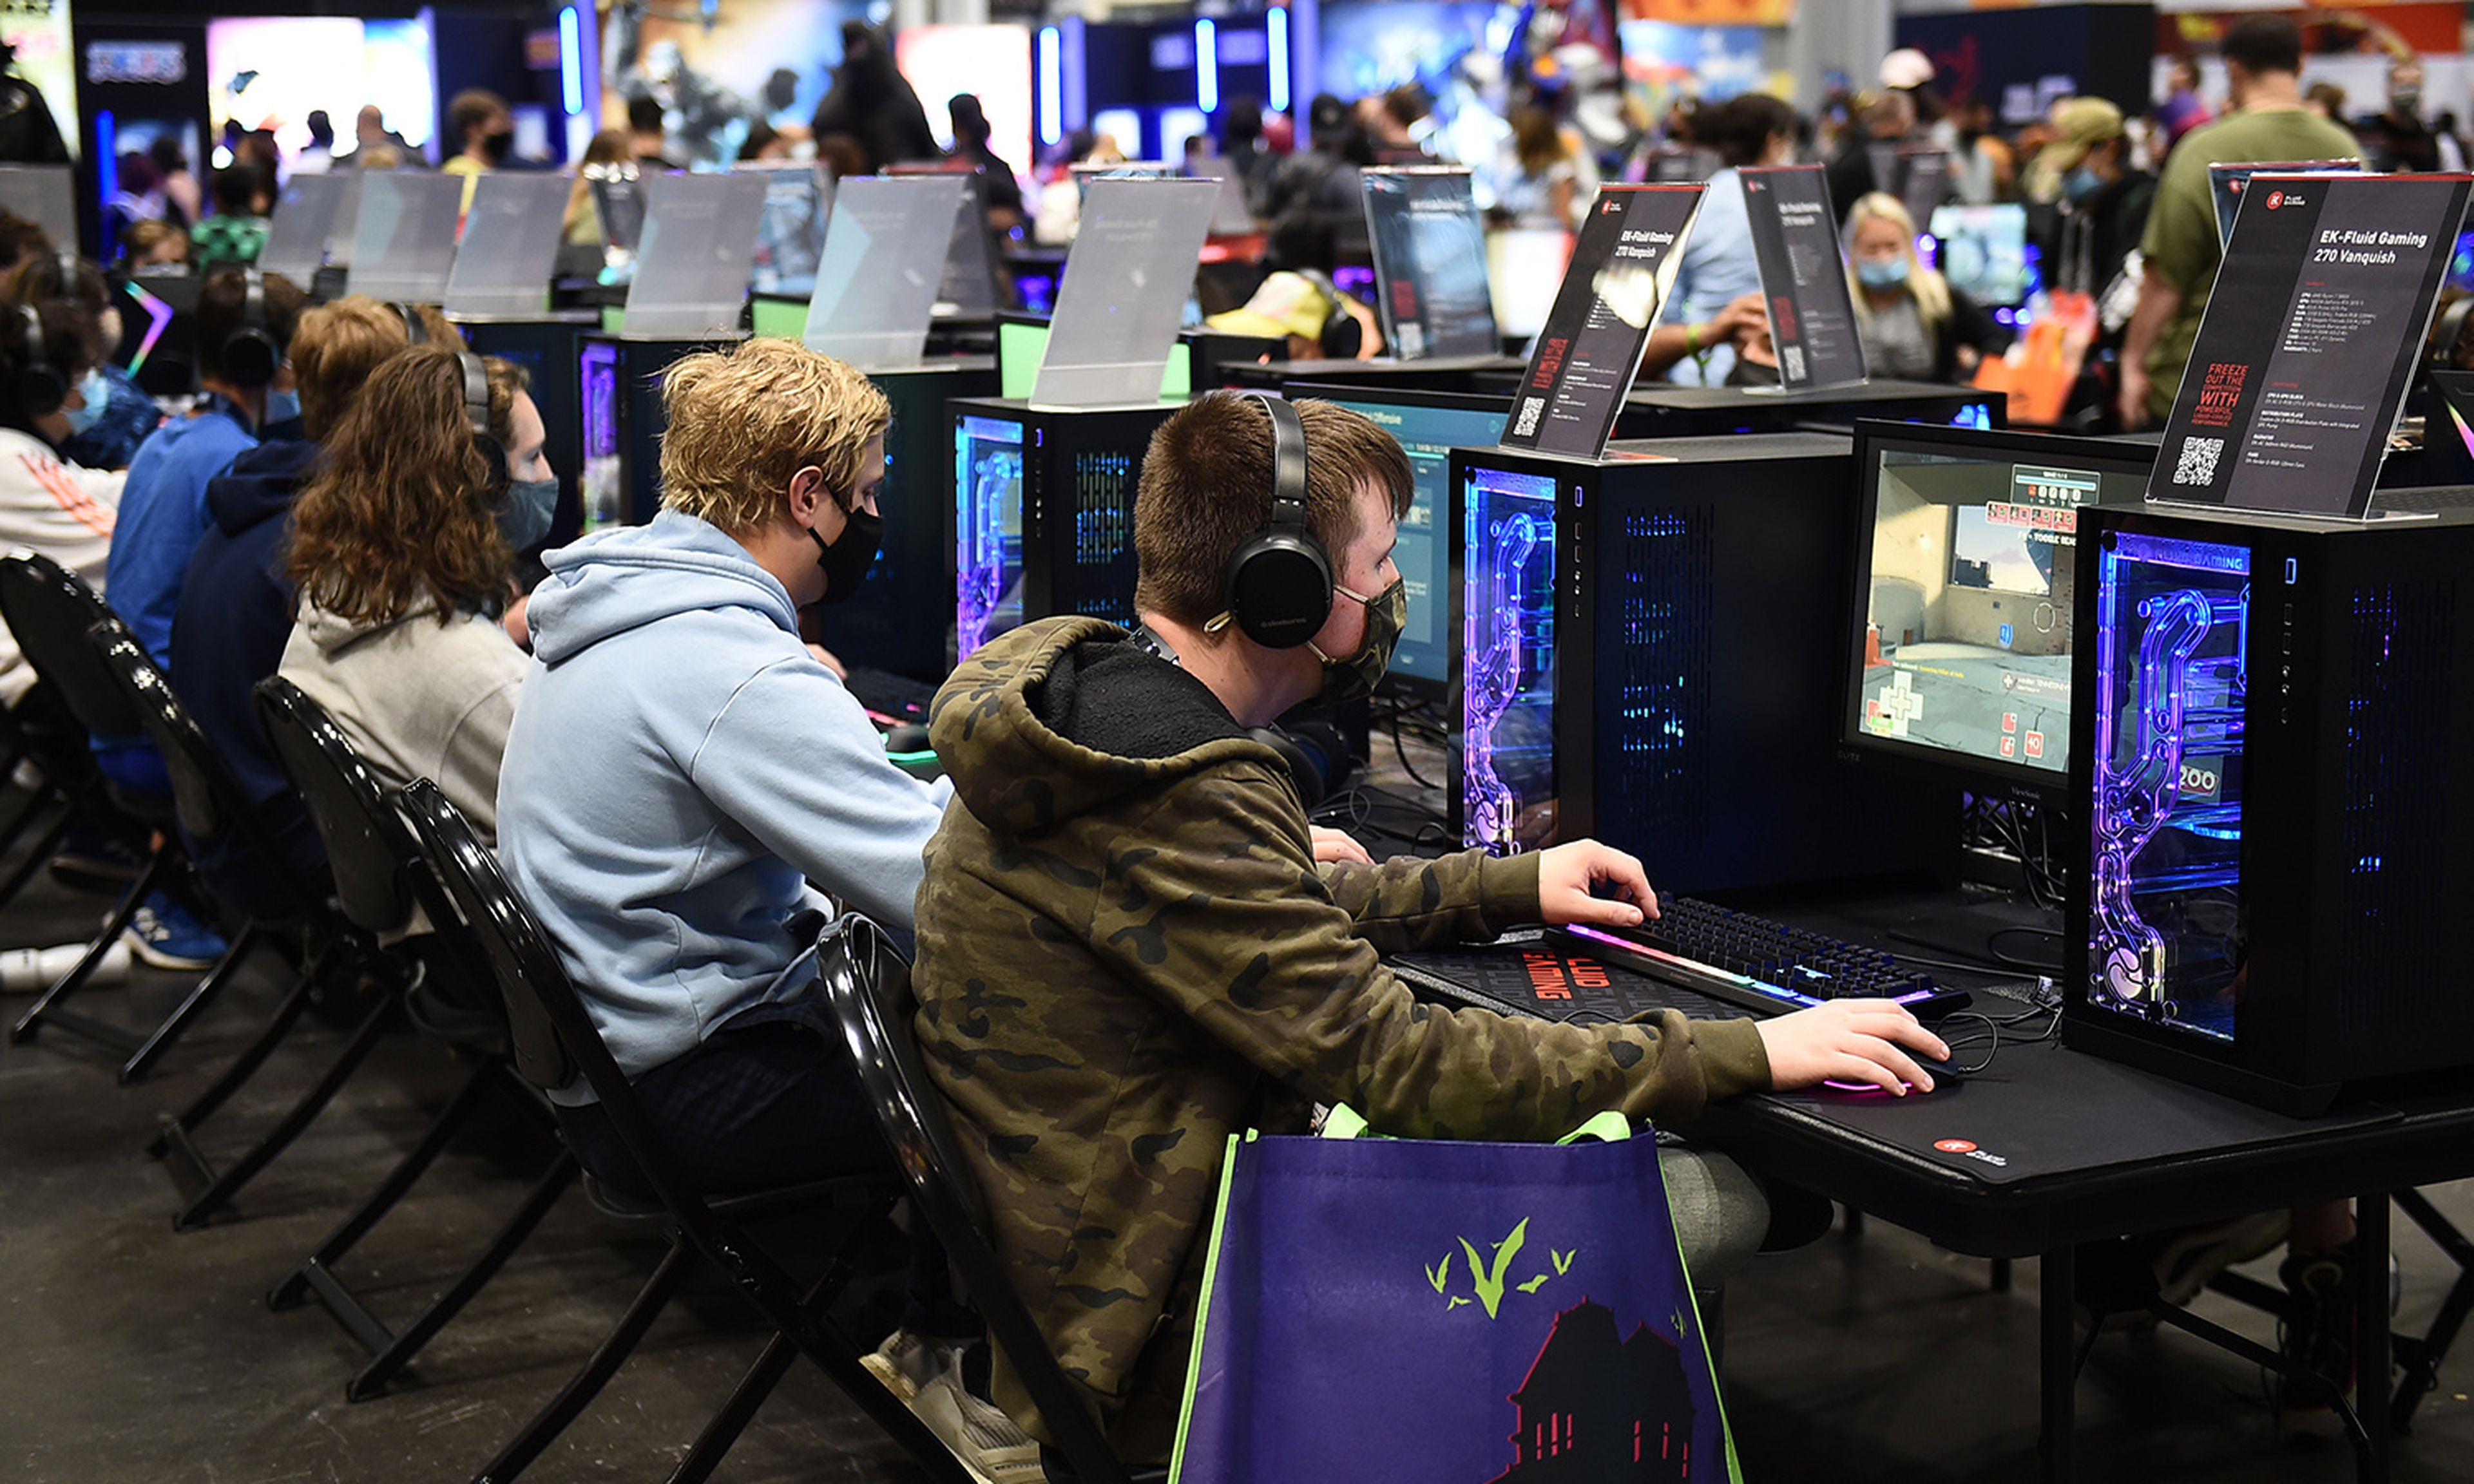 Gamers test the systems in the Gaming Zone during Day 3 of New York Comic Con 2021 at Jacob Javits Center on Oct. 9, 2021, in New York City. (Photo by Ilya S. Savenok/Getty Images for ReedPop)